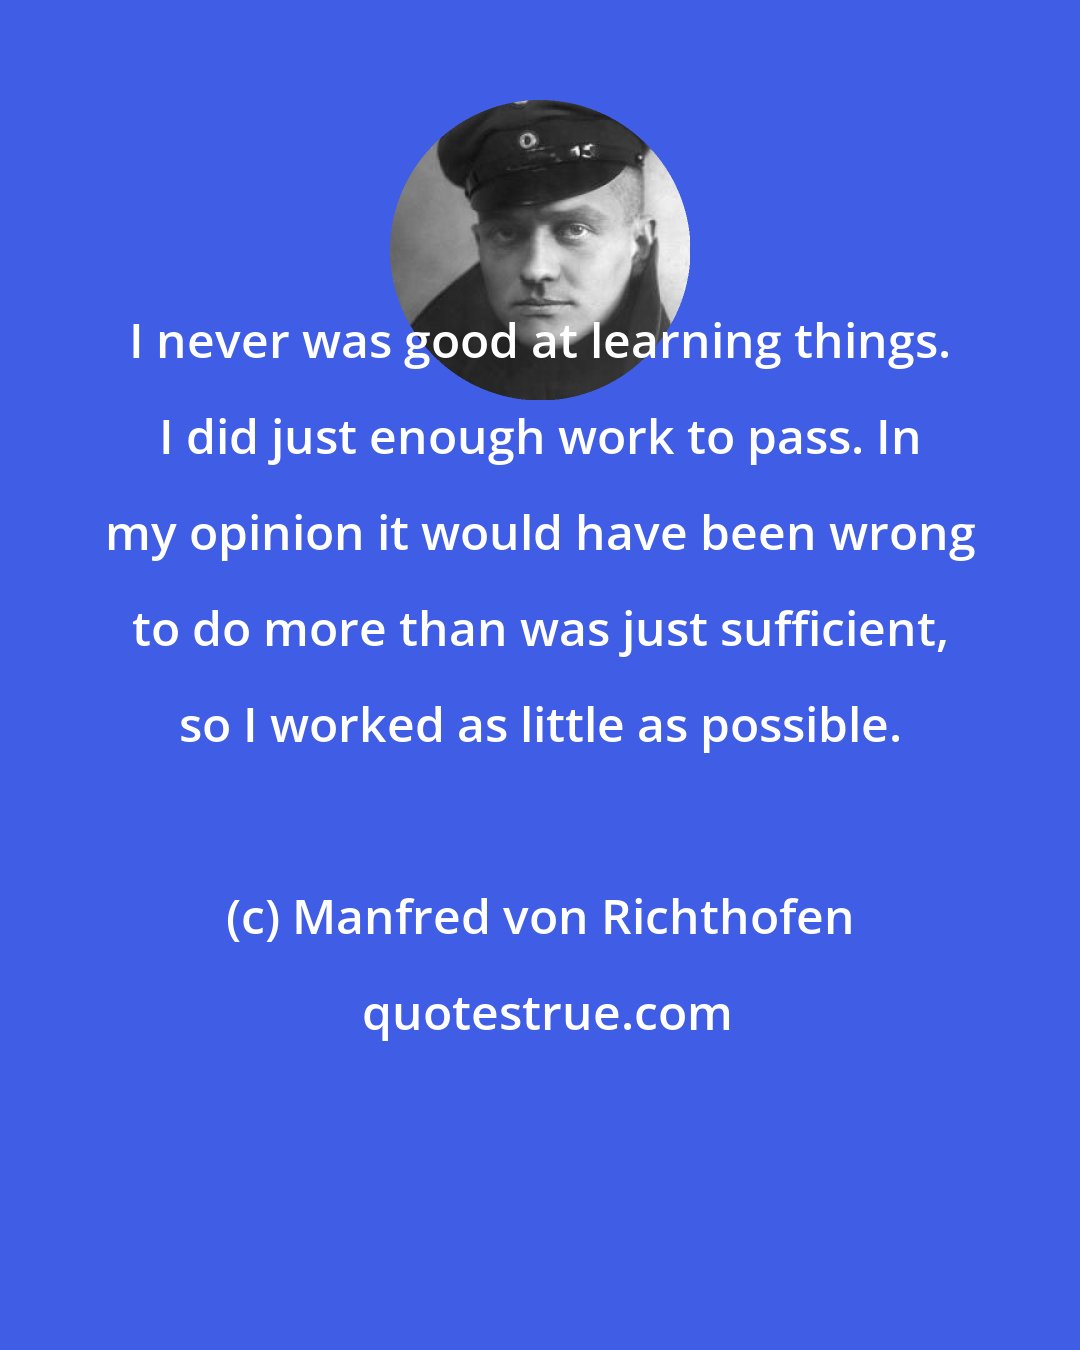 Manfred von Richthofen: I never was good at learning things. I did just enough work to pass. In my opinion it would have been wrong to do more than was just sufficient, so I worked as little as possible.